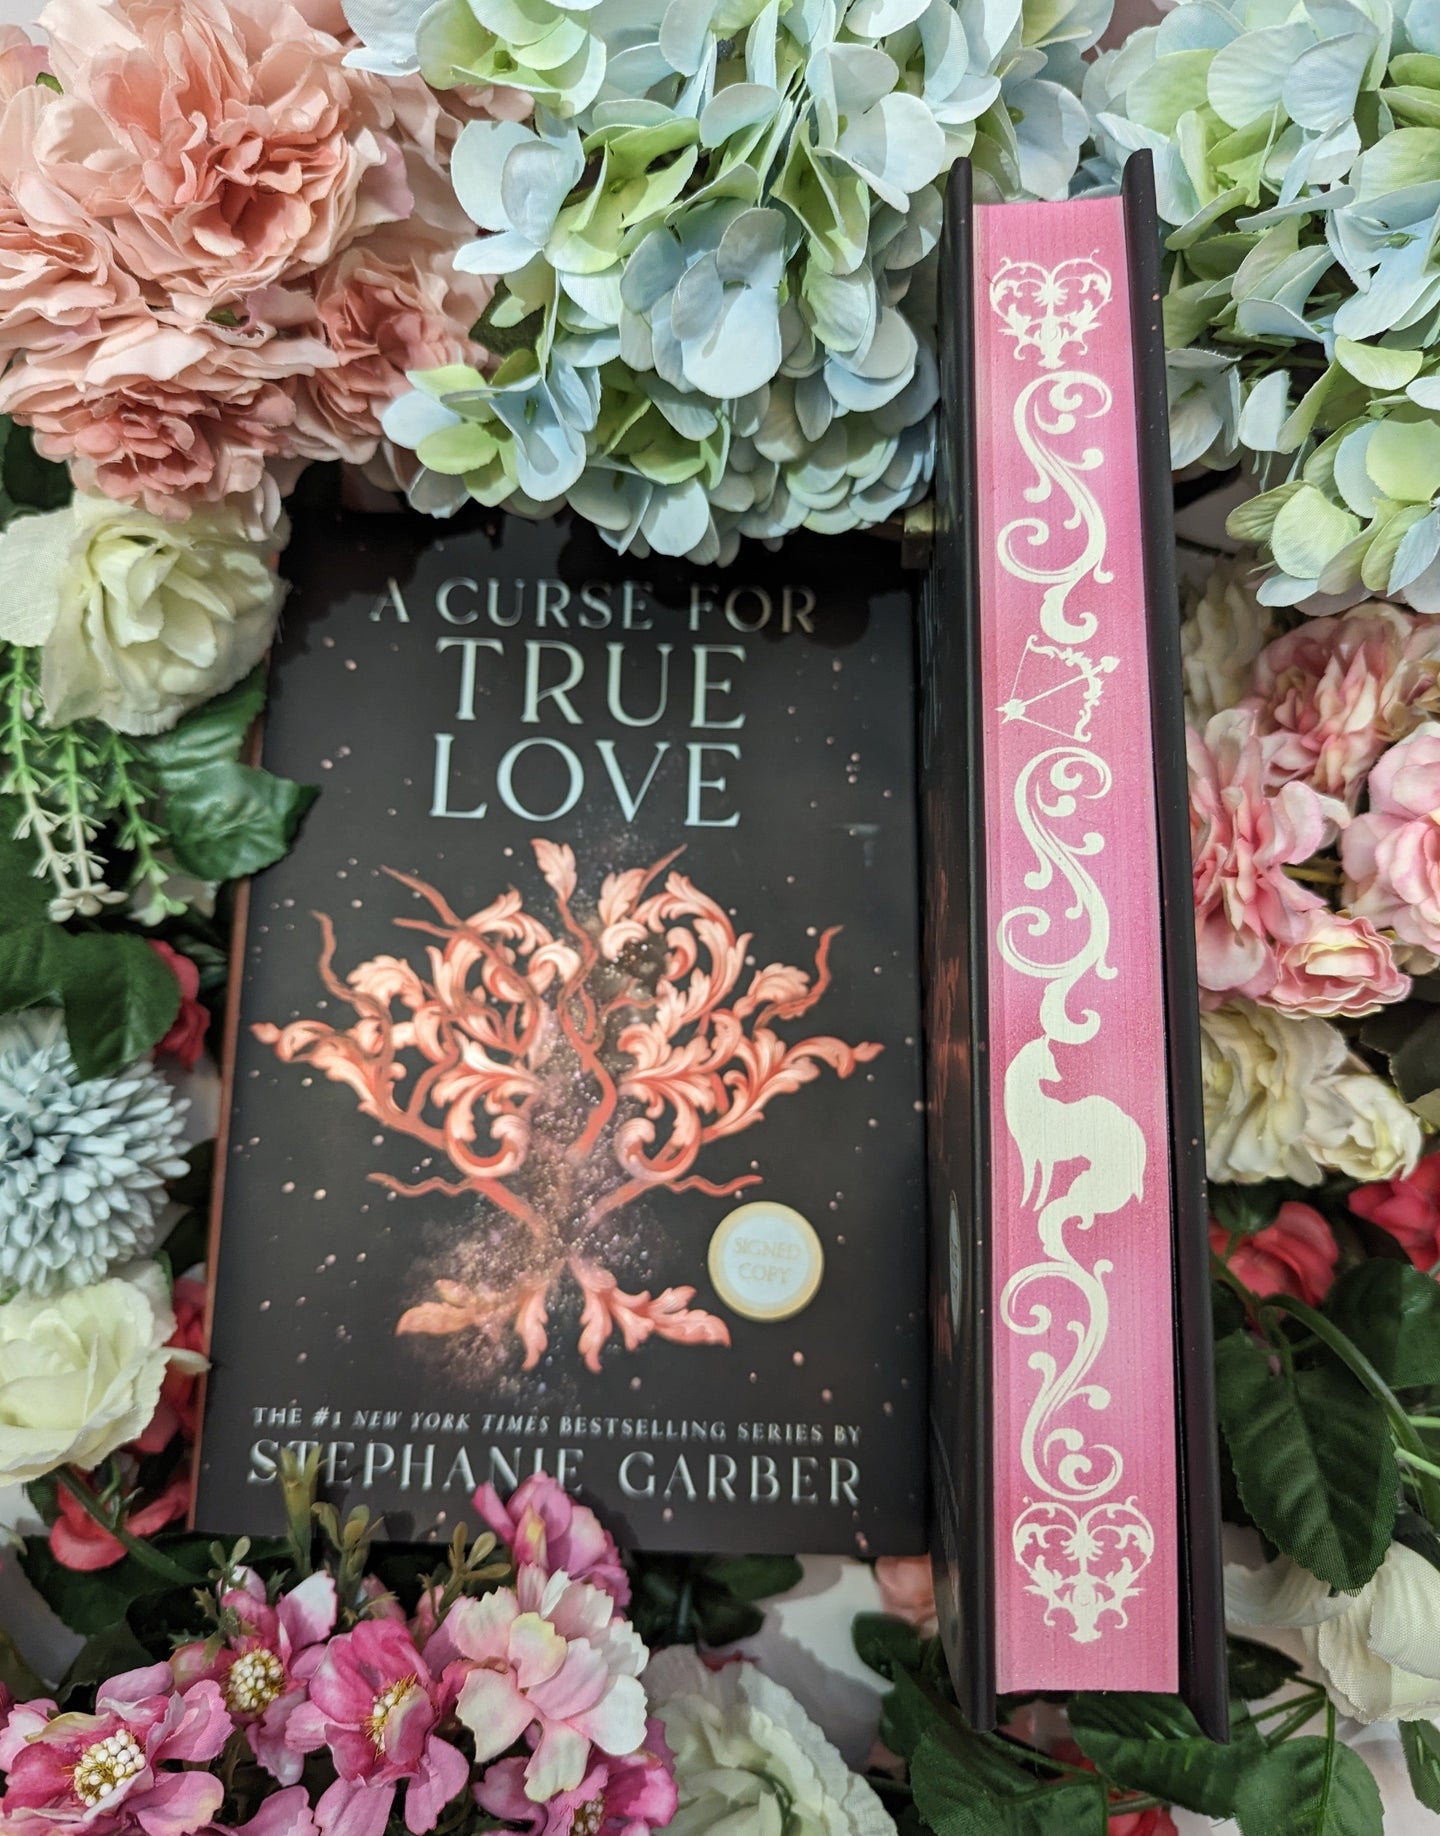 A Curse for True Love - Stephanie Garber - Signed Special Edition